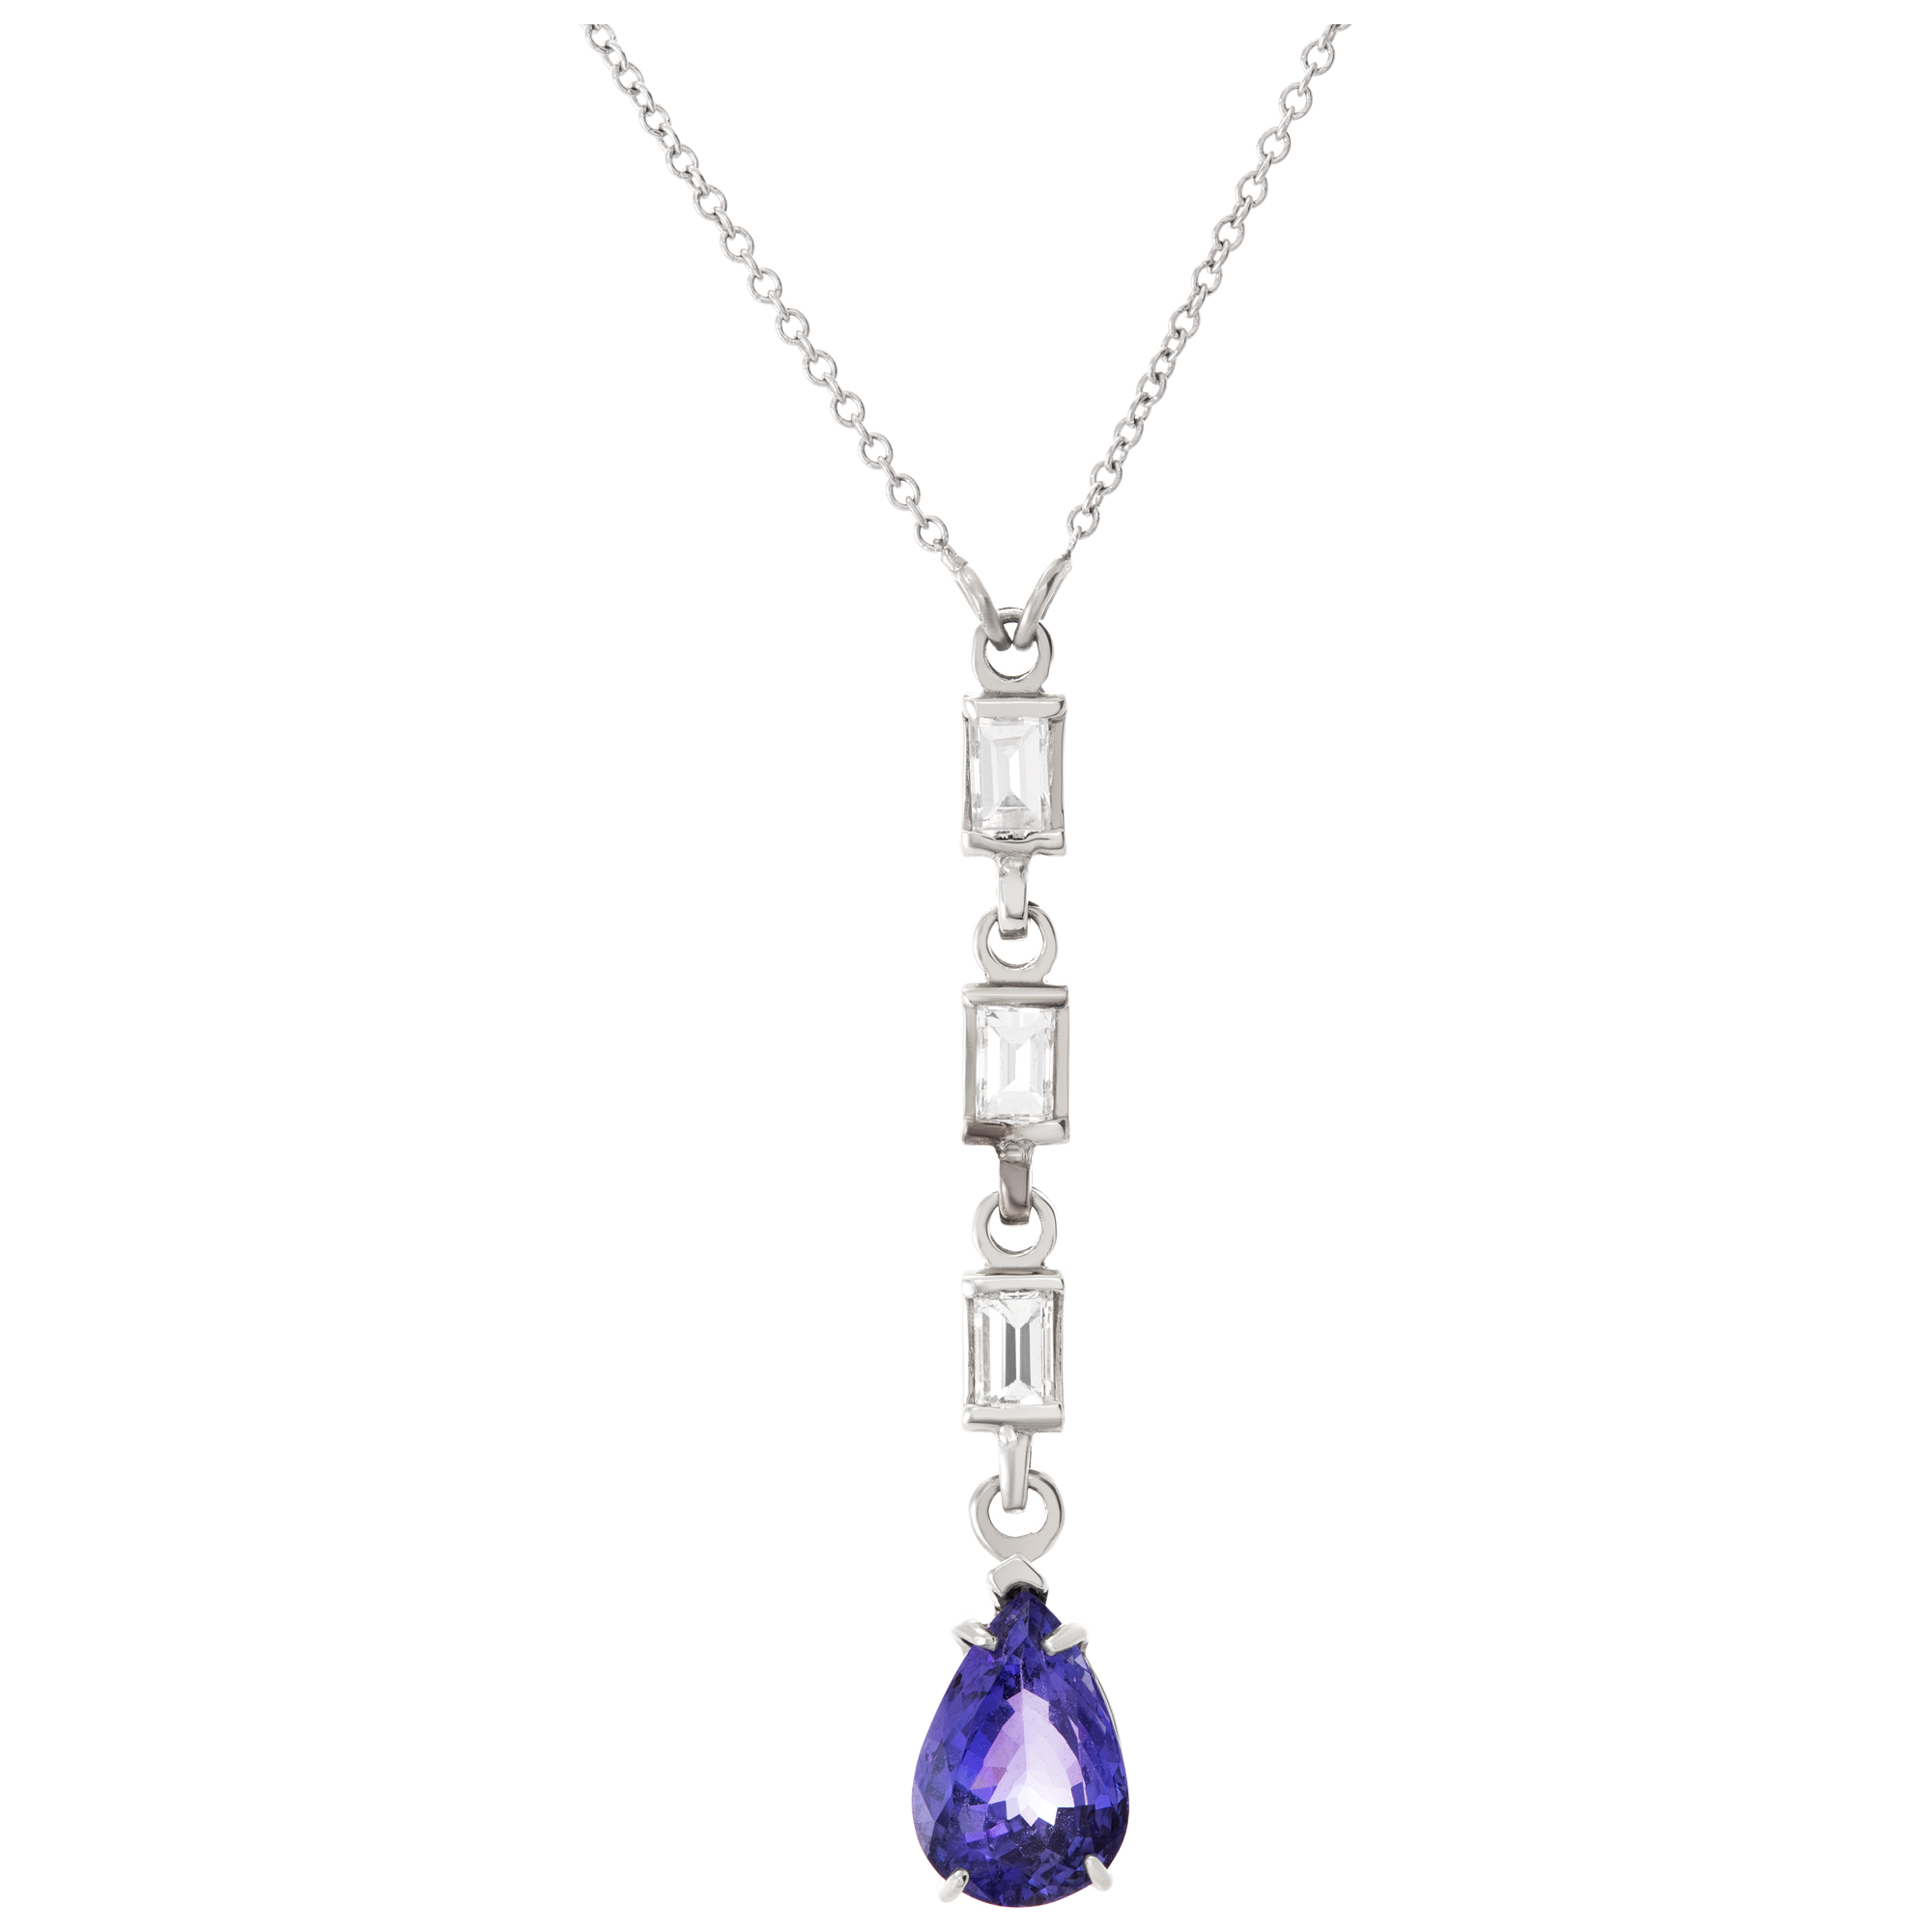 Necklace in 14k white gold with diamonds and tanzinite